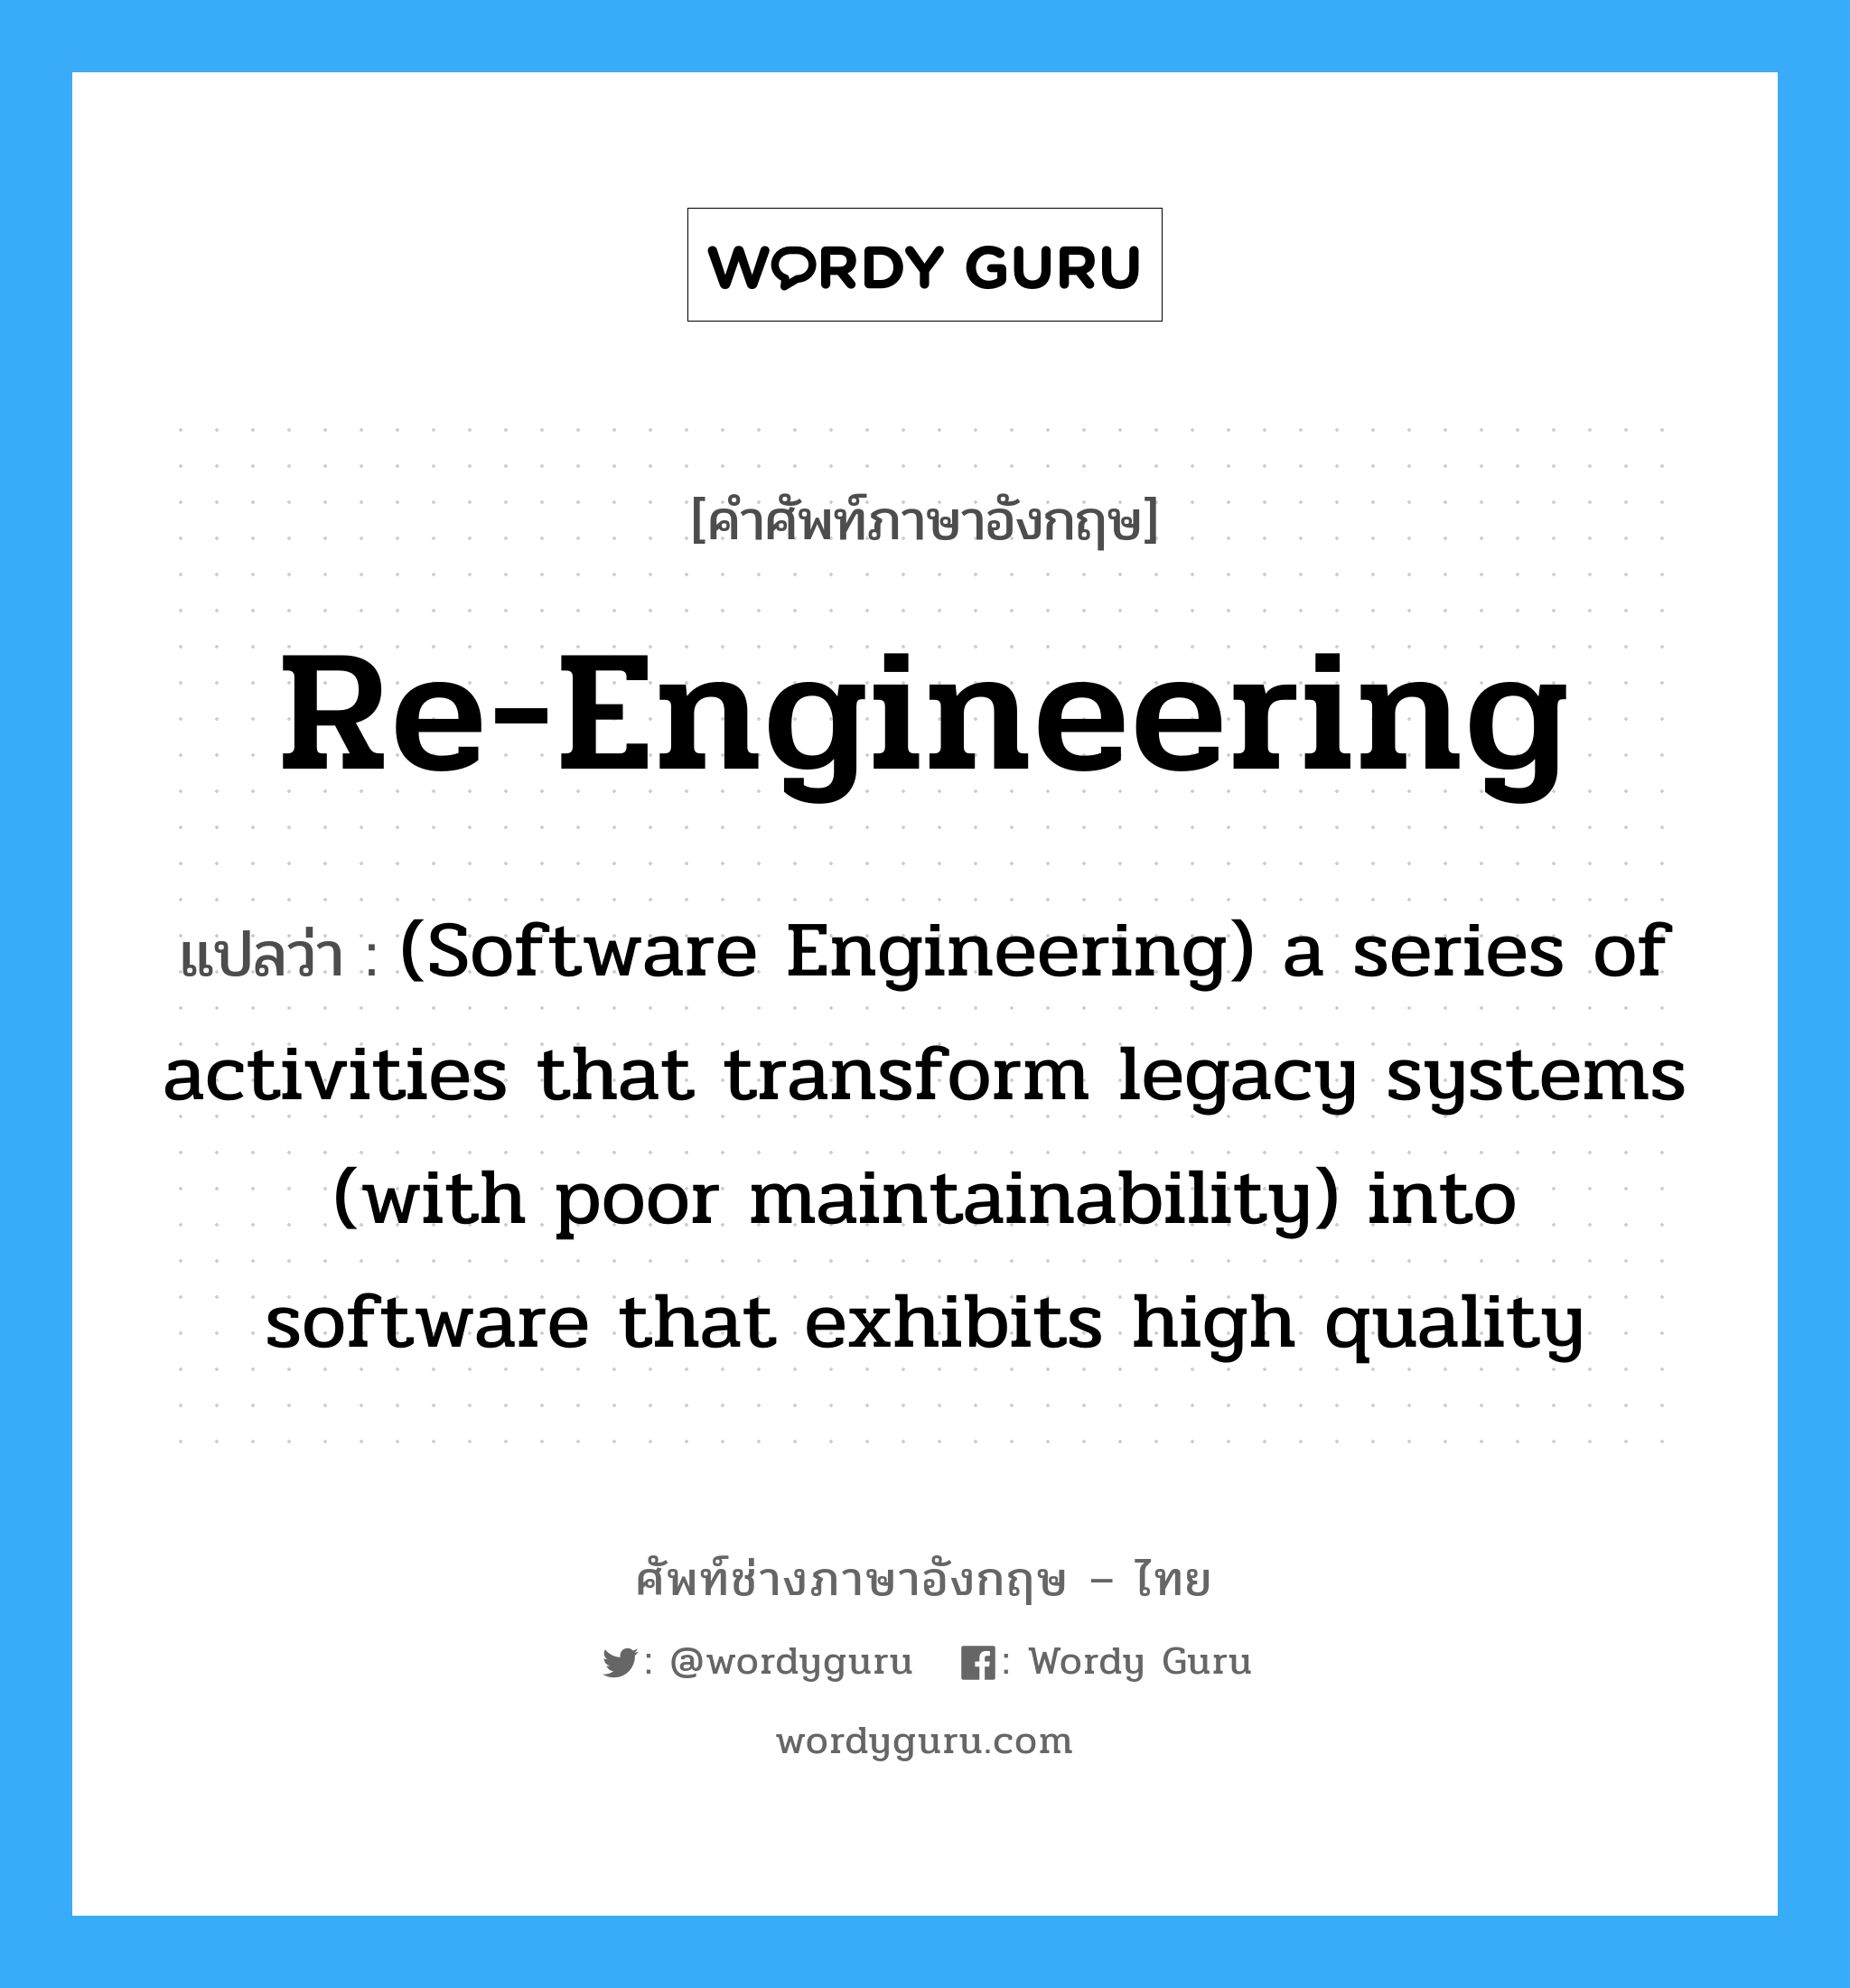 (Software Engineering) a series of activities that transform legacy systems (with poor maintainability) into software that exhibits high quality ภาษาอังกฤษ?, คำศัพท์ช่างภาษาอังกฤษ - ไทย (Software Engineering) a series of activities that transform legacy systems (with poor maintainability) into software that exhibits high quality คำศัพท์ภาษาอังกฤษ (Software Engineering) a series of activities that transform legacy systems (with poor maintainability) into software that exhibits high quality แปลว่า Re-engineering